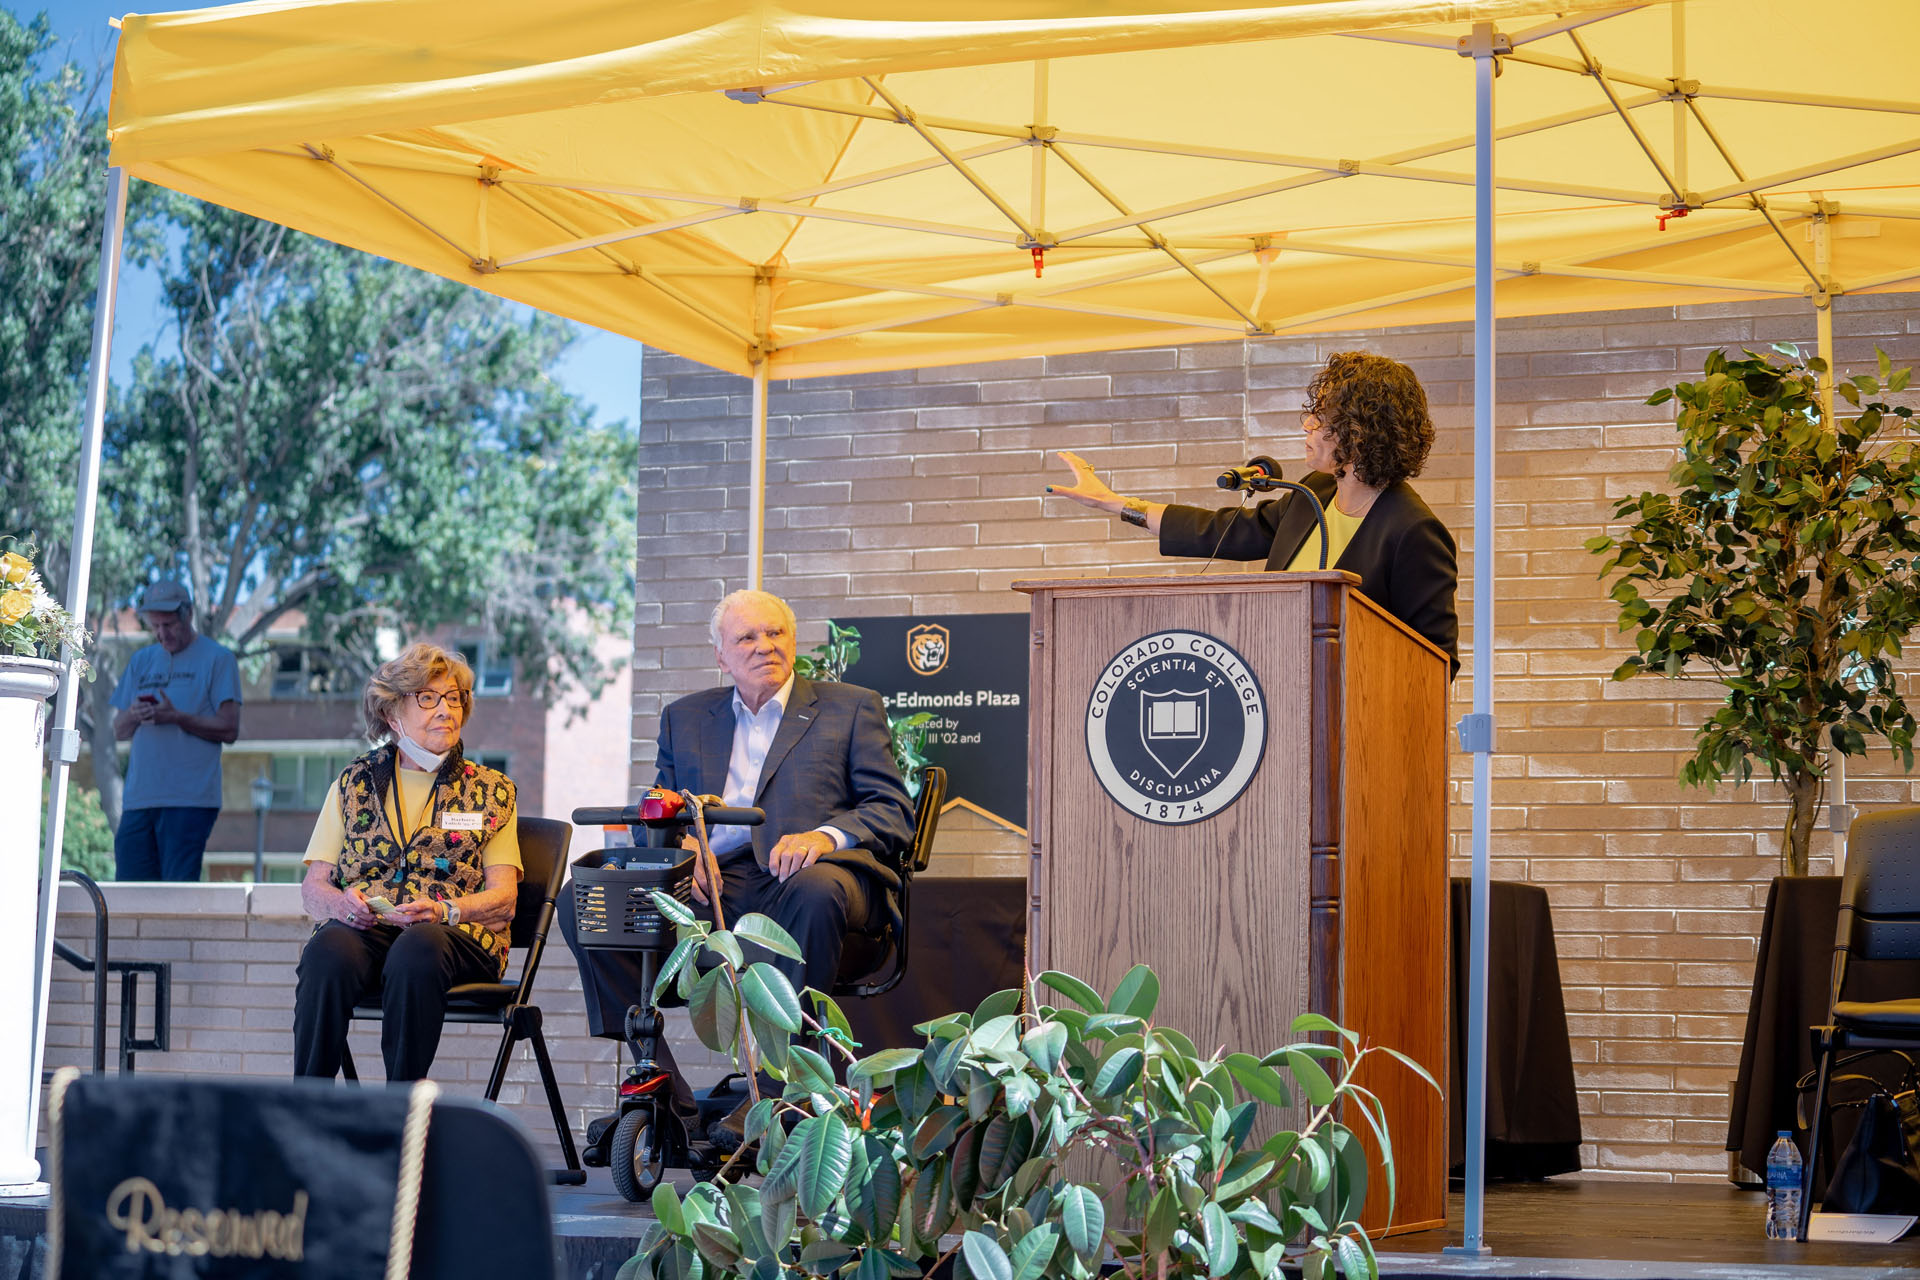 CC celebrated the opening of the new Ed Robson Arena and Yalich Student Services Center with a ribbon-cutting ceremony and remarks from President L. Song Richardson (standing) and building namesakes <strong>Barbara Yalich ’53</strong> and <strong>Ed Robson ’54</strong> (both seated) on Saturday, Sept. 18. Photo by Gray Warrior.